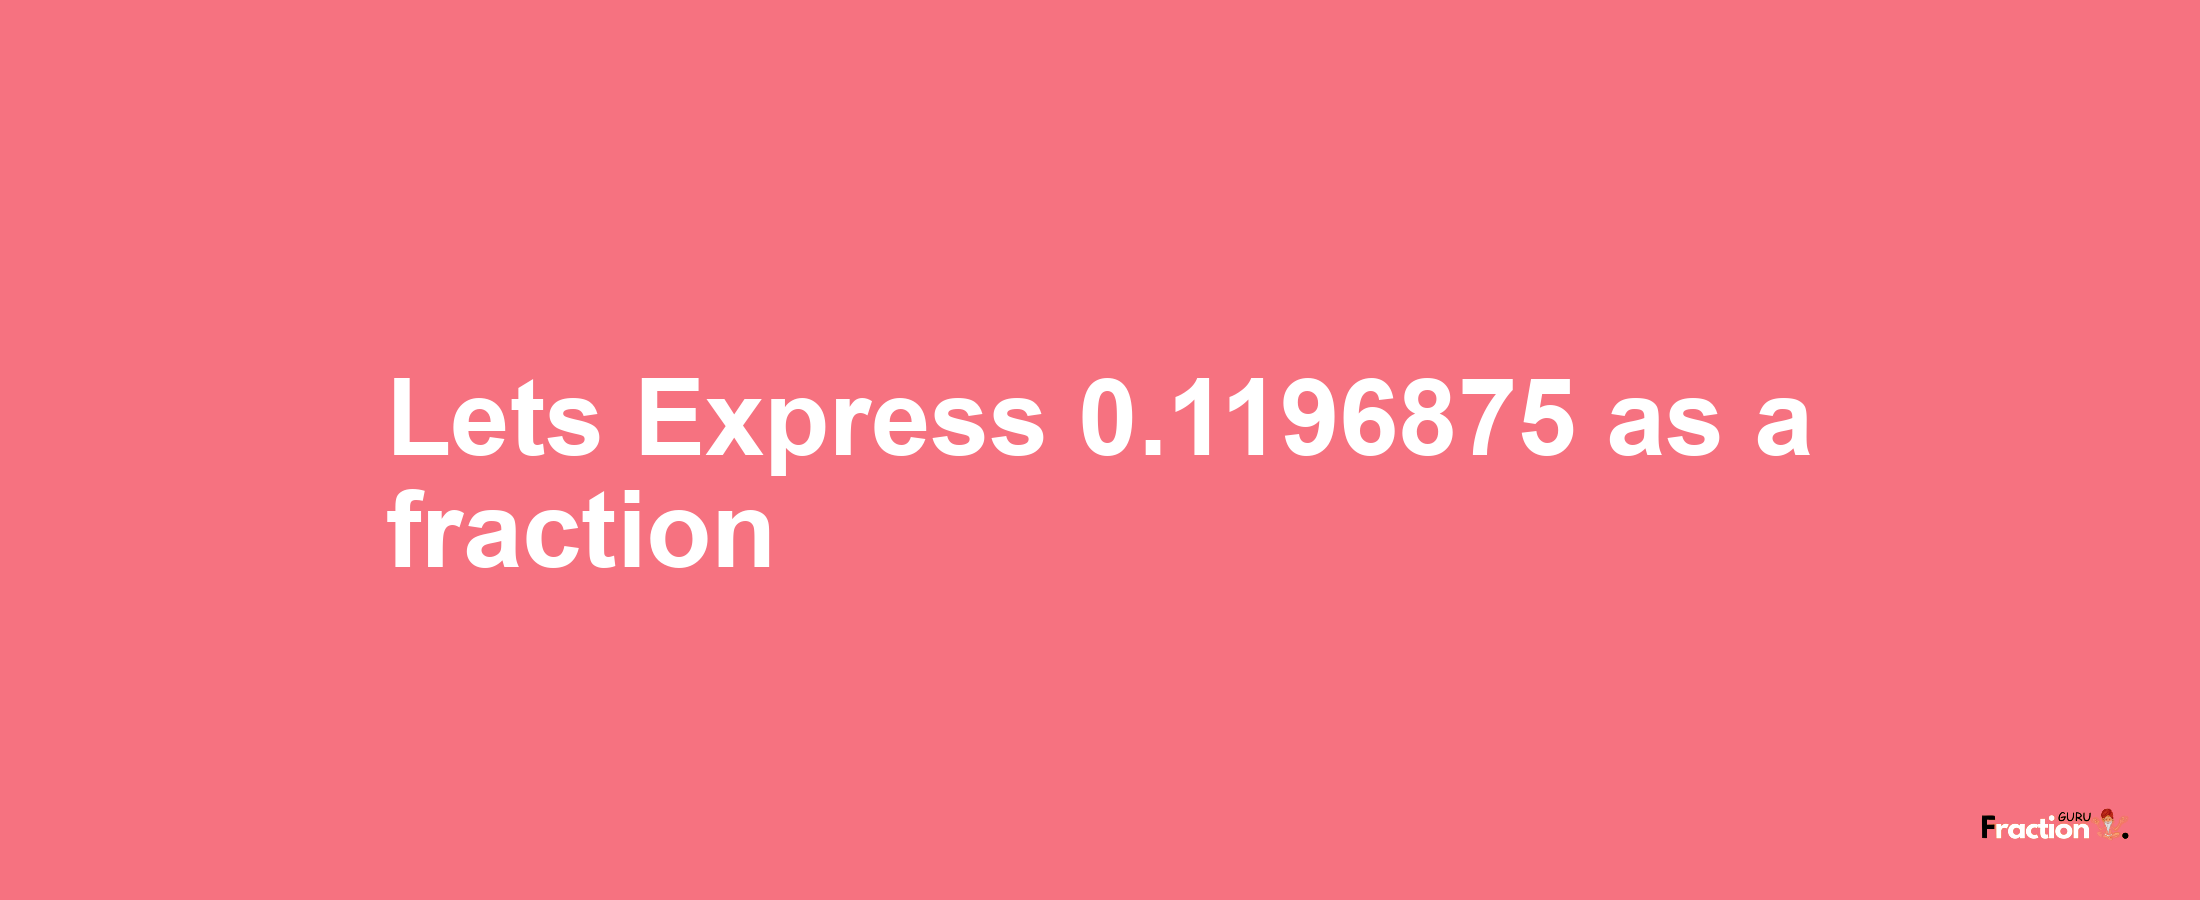 Lets Express 0.1196875 as afraction